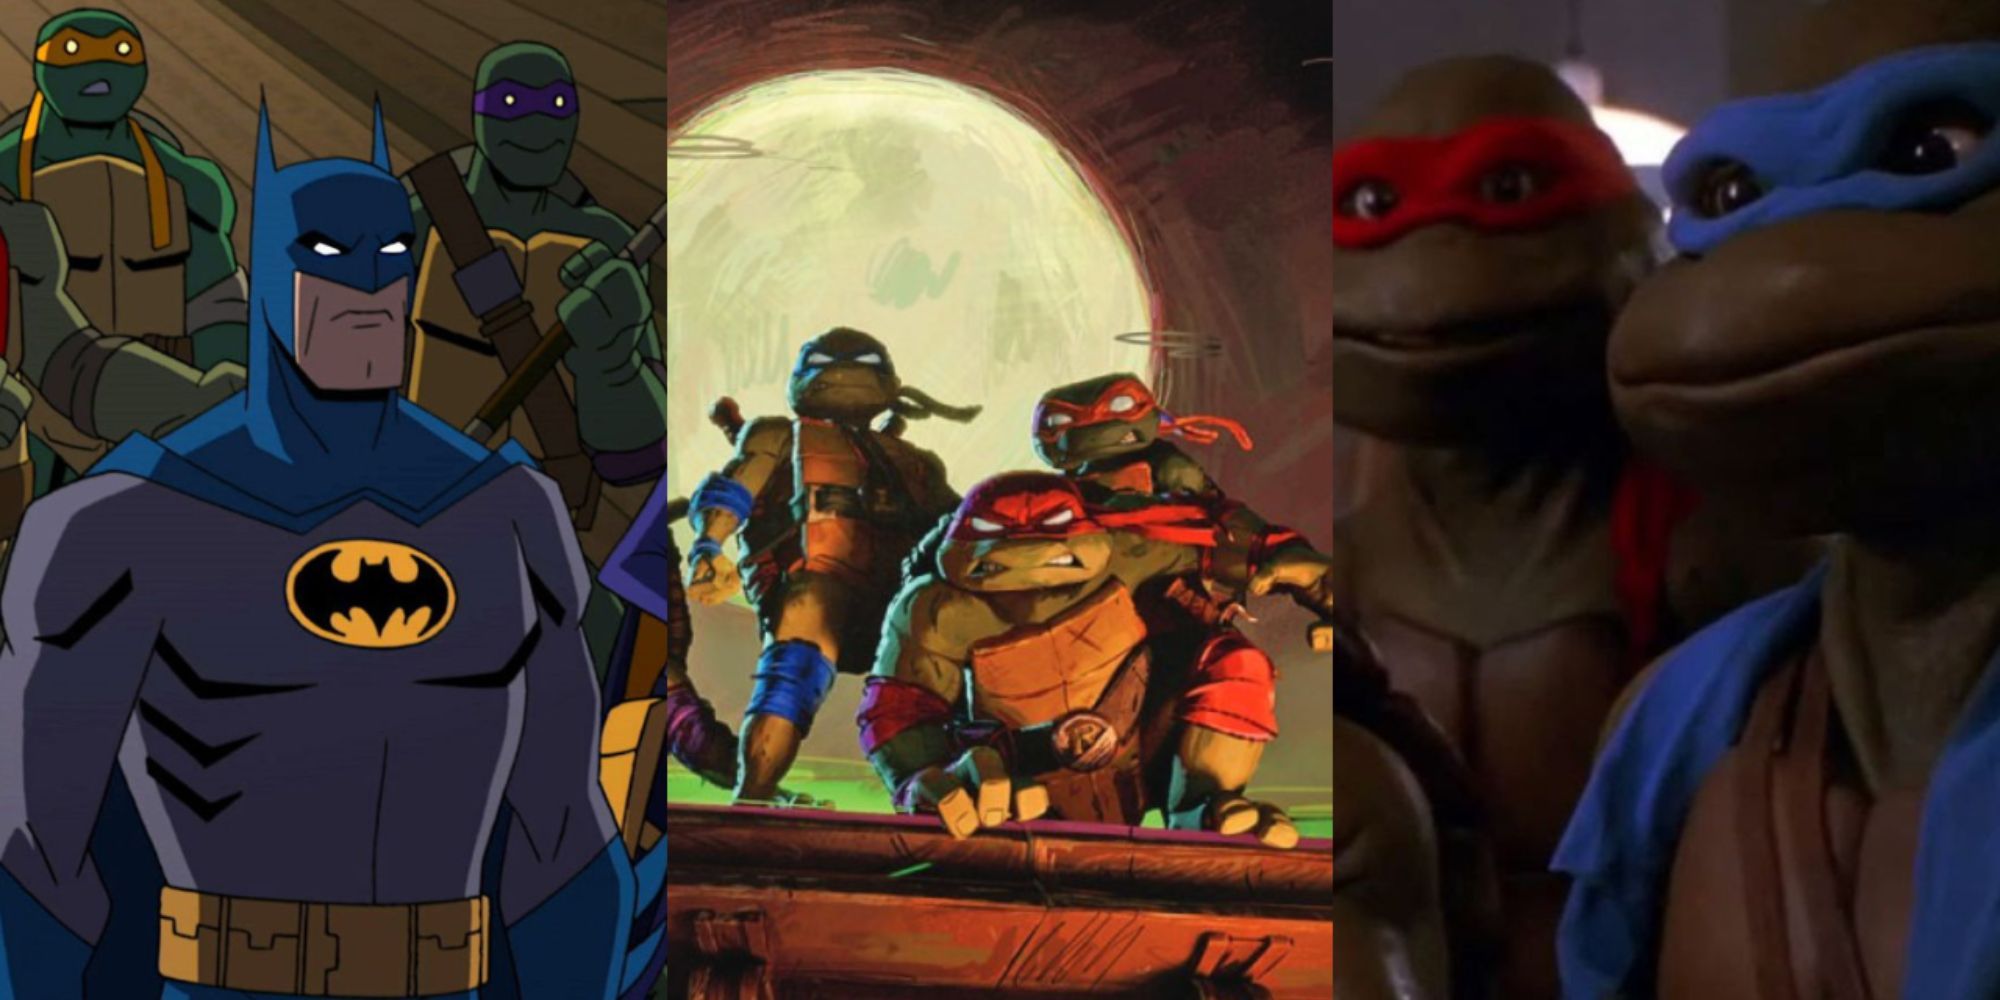 Split image of Batman with Mikey and Donny in Batman vs Teenage Mutant Ninja Turtles, Leo, Mikey and Raph in front of the moon in Mutant Mayhem, and Leo and Raph in TMNT 1991